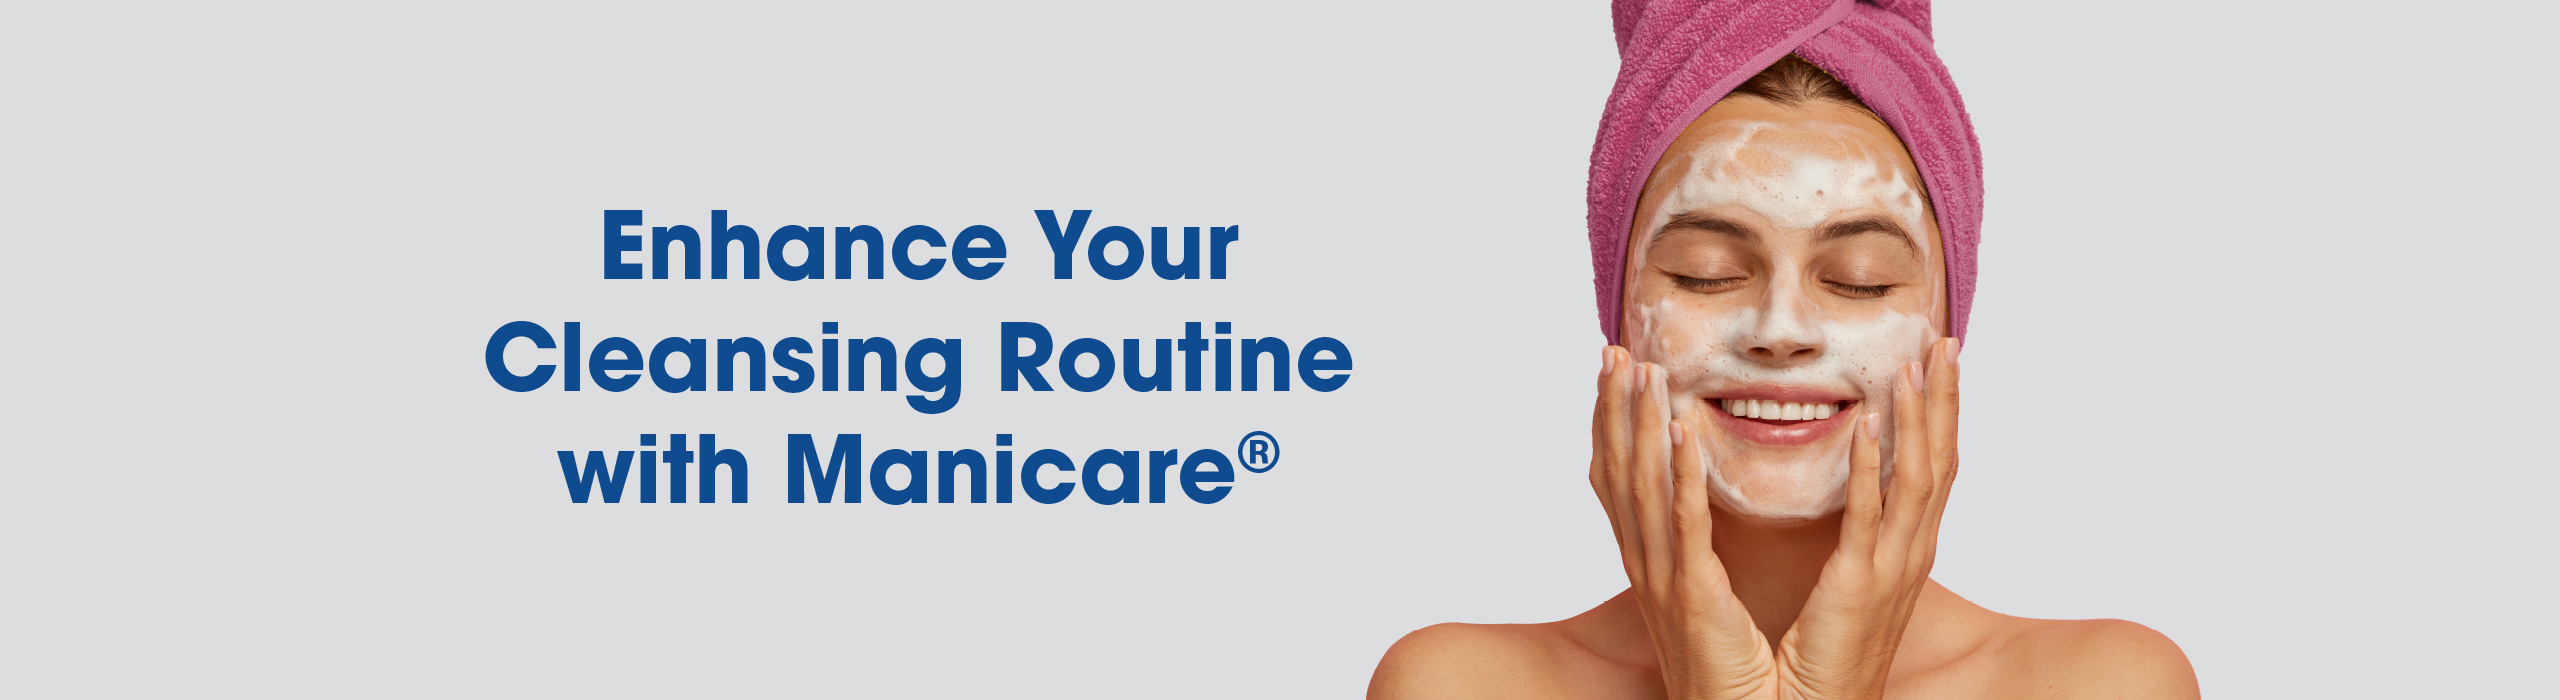 Enhance Your Cleansing Routine with Manicare®